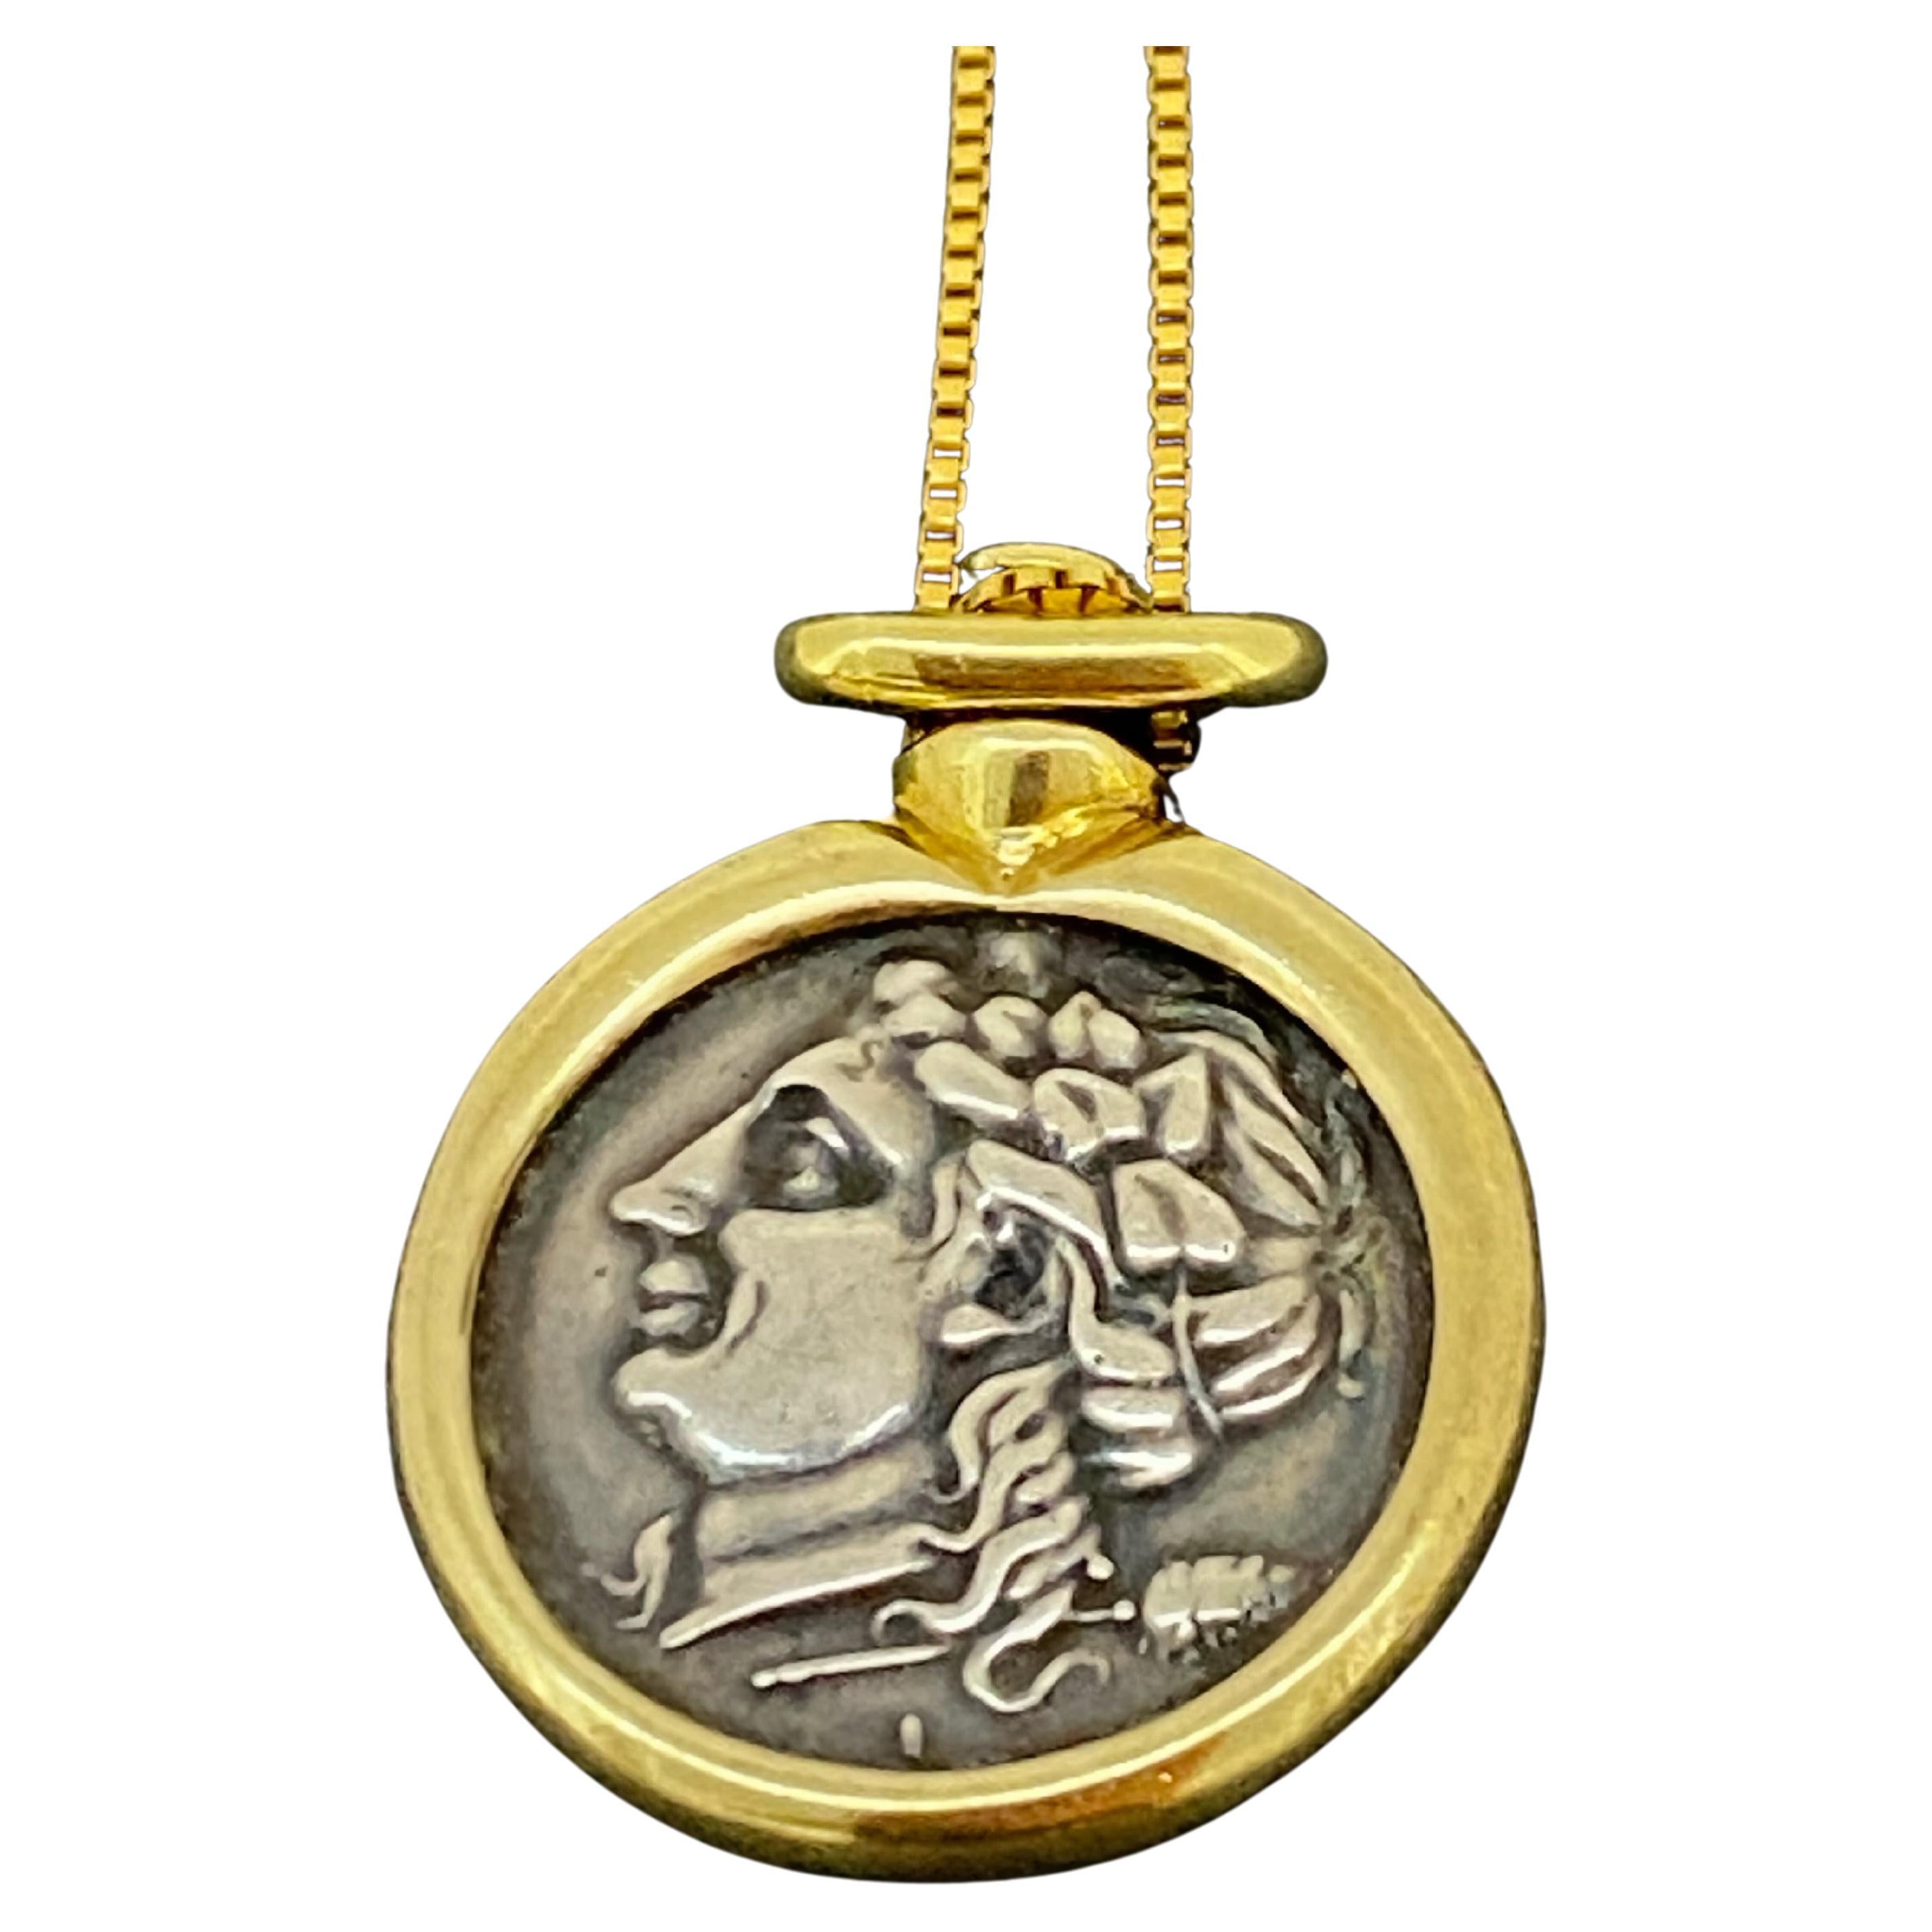 This vintage Two-Tone 18K Yellow Gold Pendant
is designed as an ancient Greek Coin, 
depicting Hercules - 
Roman equivalent of the Greek divine hero Heracles 
(who was famous for his strength & far-ranging adventures), 

encased in 18K yellow gold